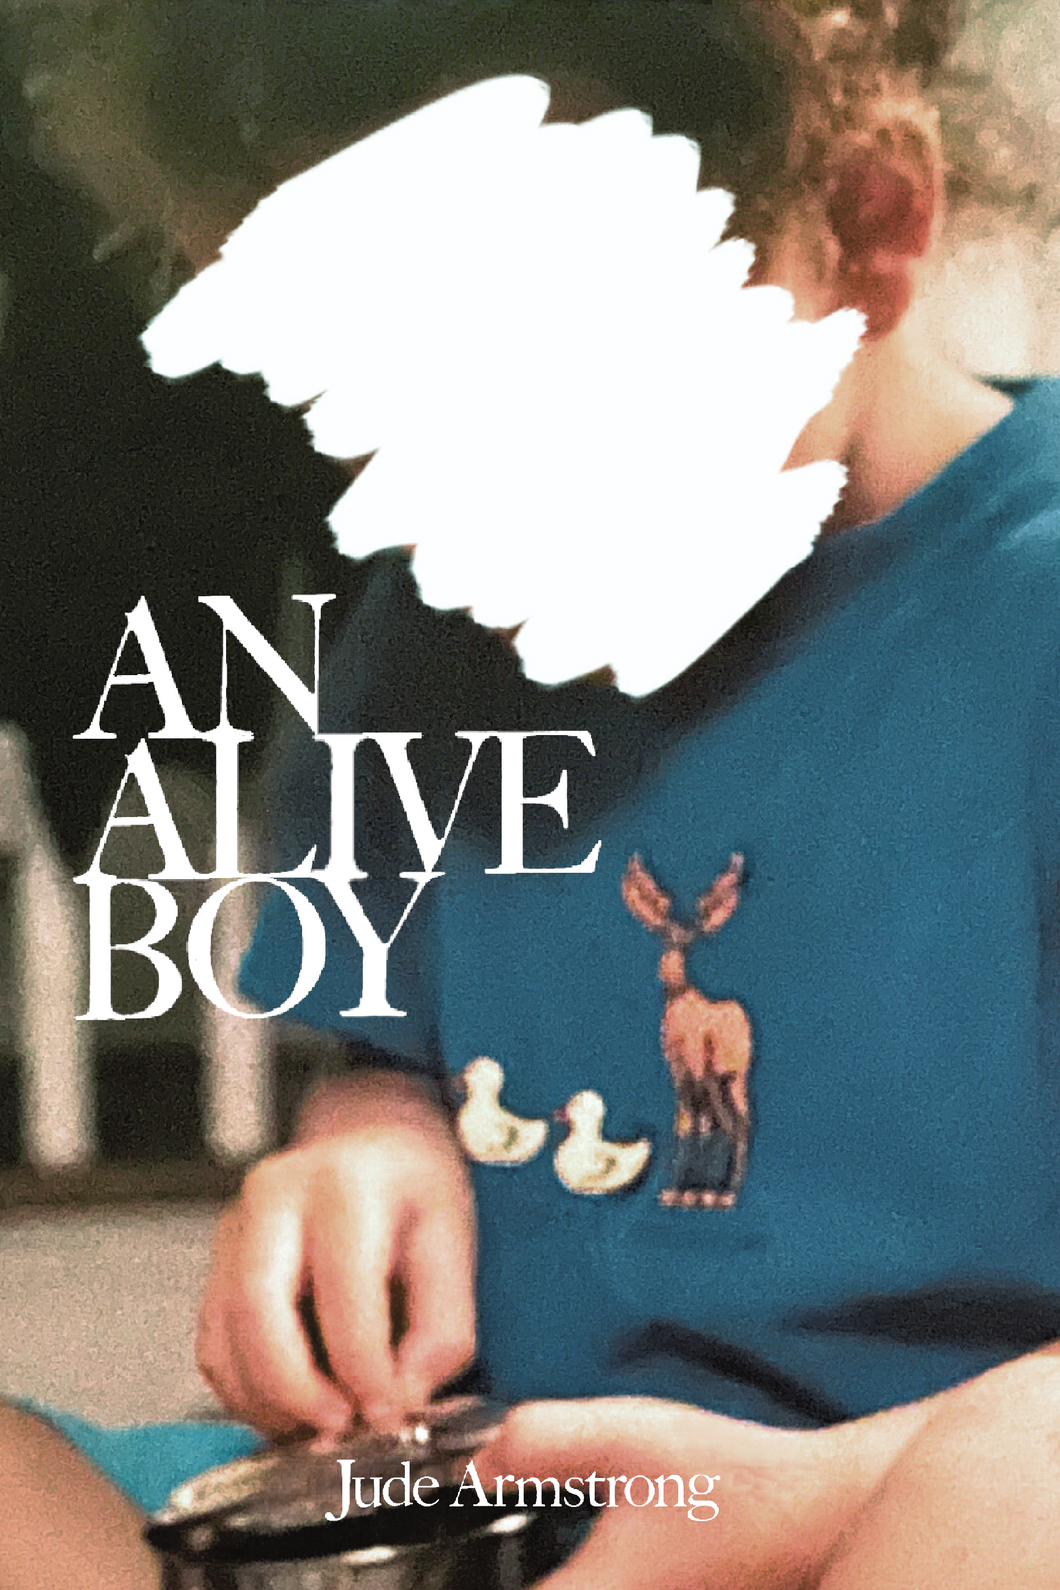 AN ALIVE BOY, by Jude Armstrong-Print Books-Bottlecap Press